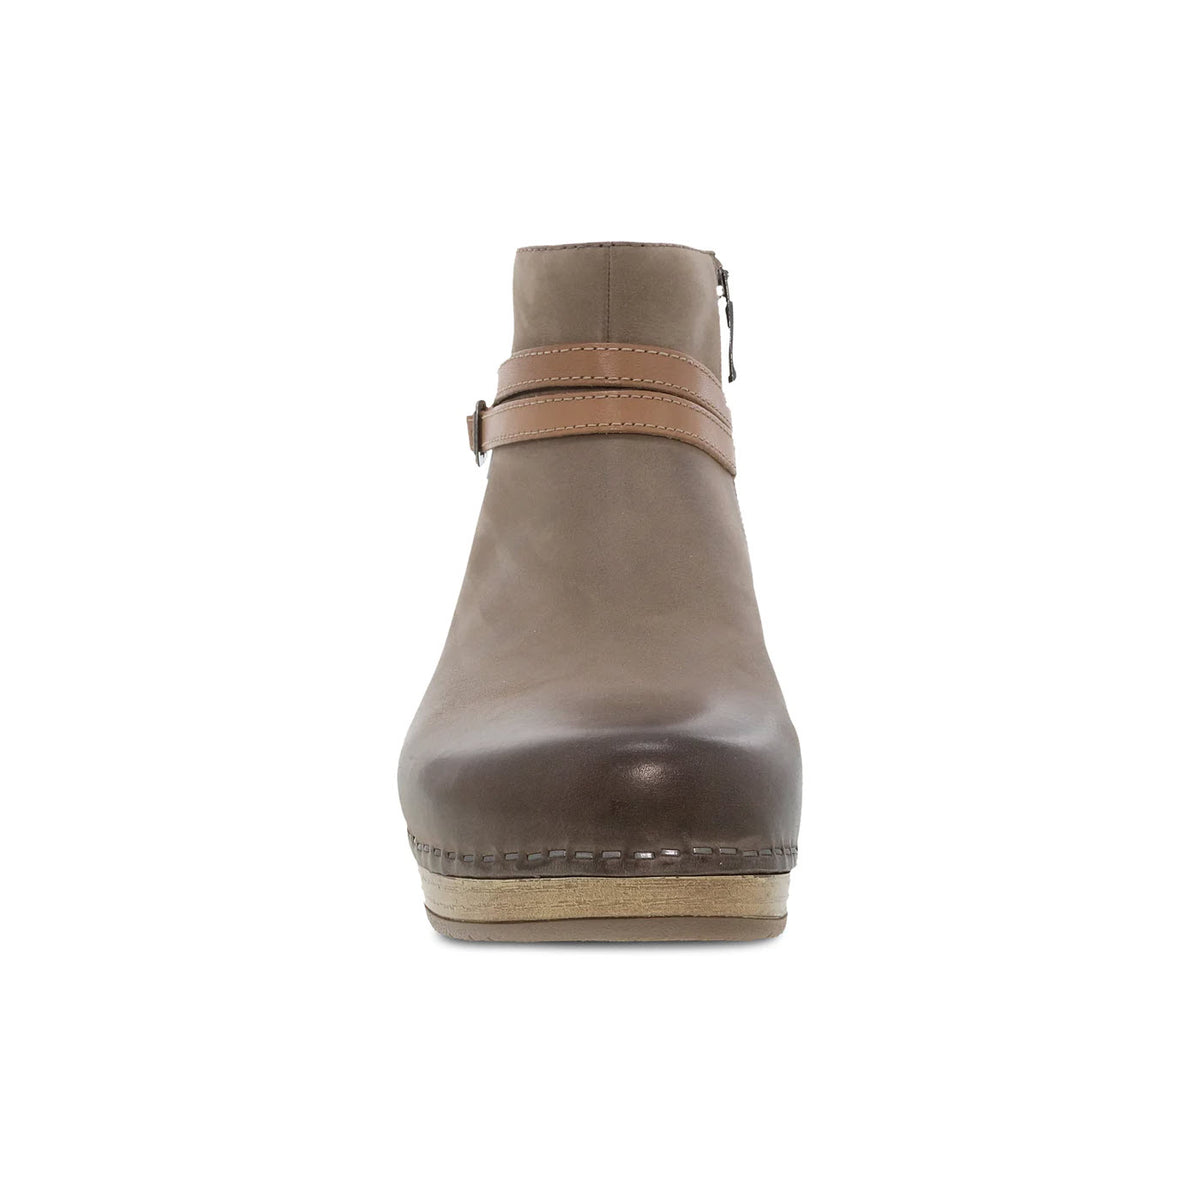 Side view of a Dansko Brook Taupe Burnished ankle bootie with a brown strap and low heel, isolated on a white background.